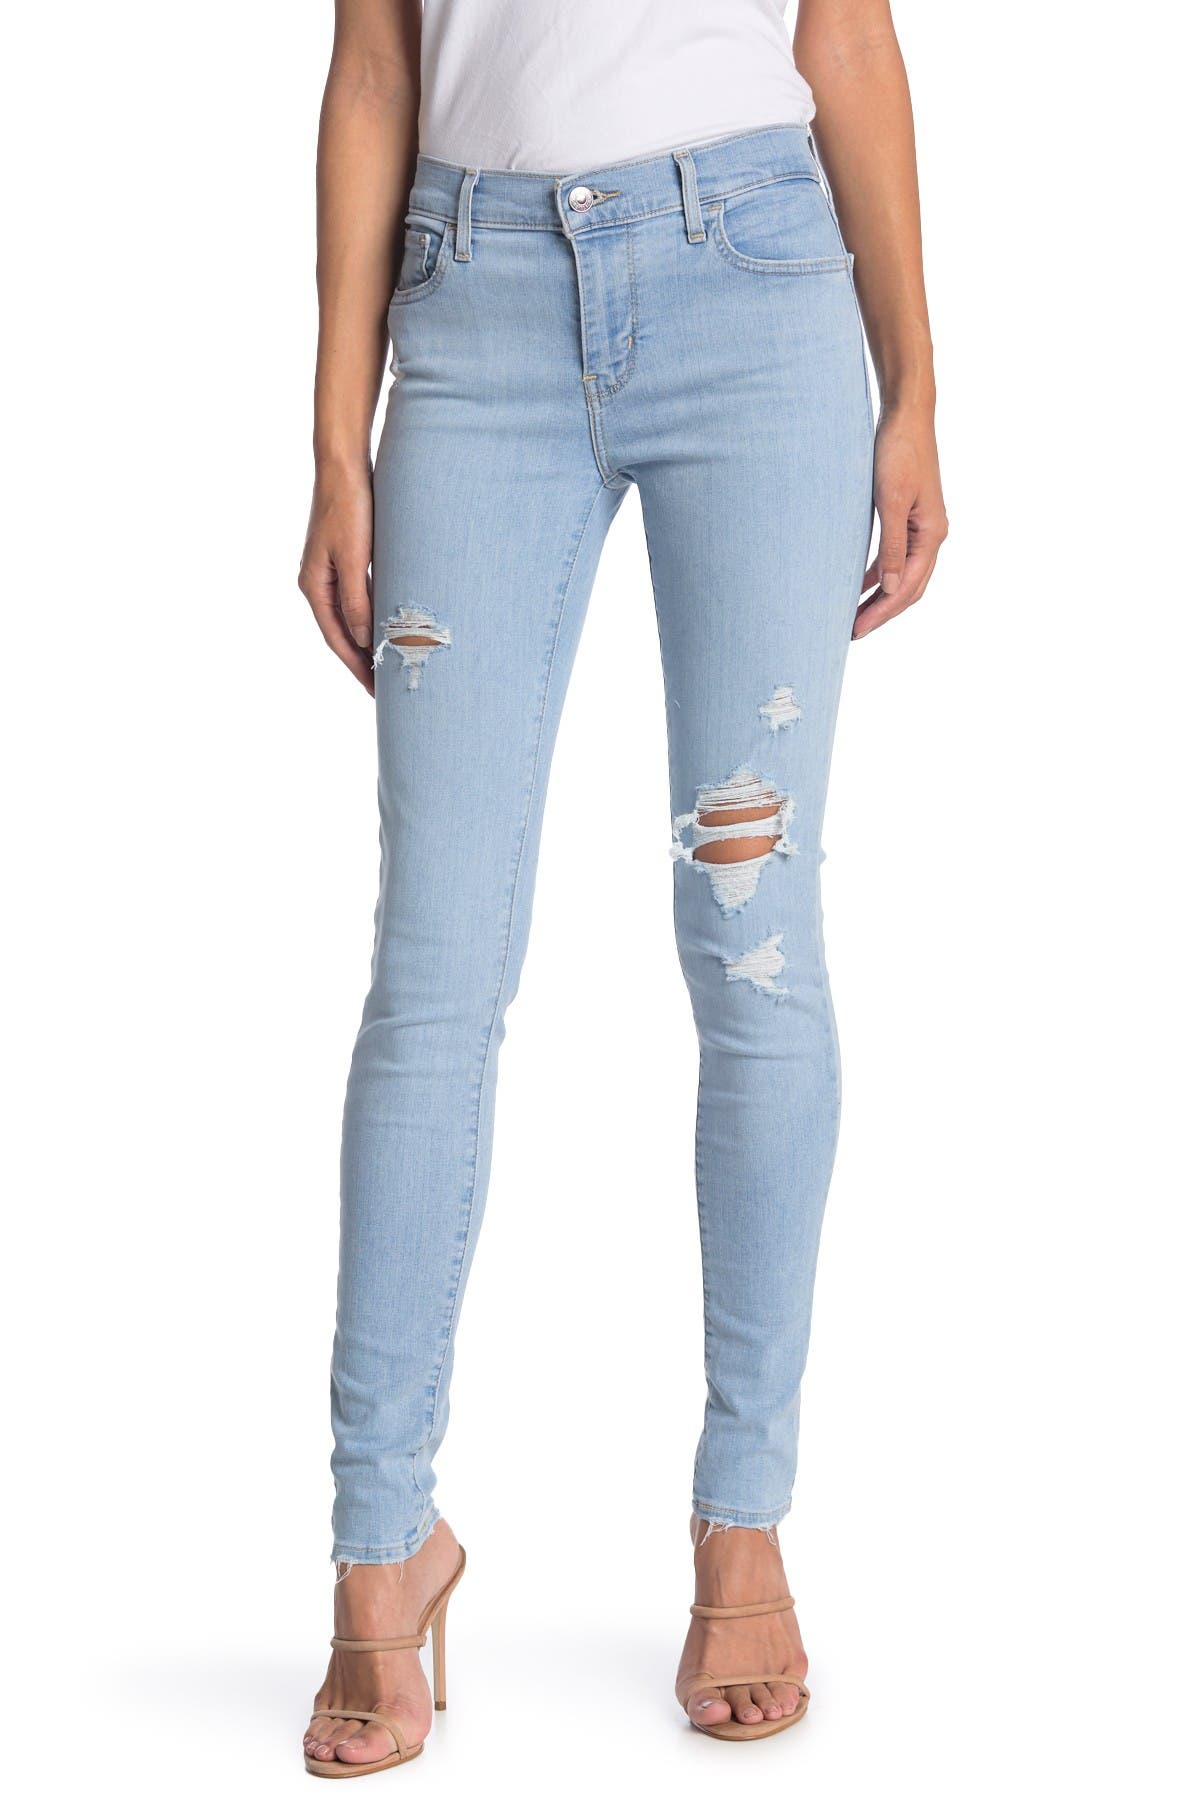 levis 710 super skinny ripped jeans